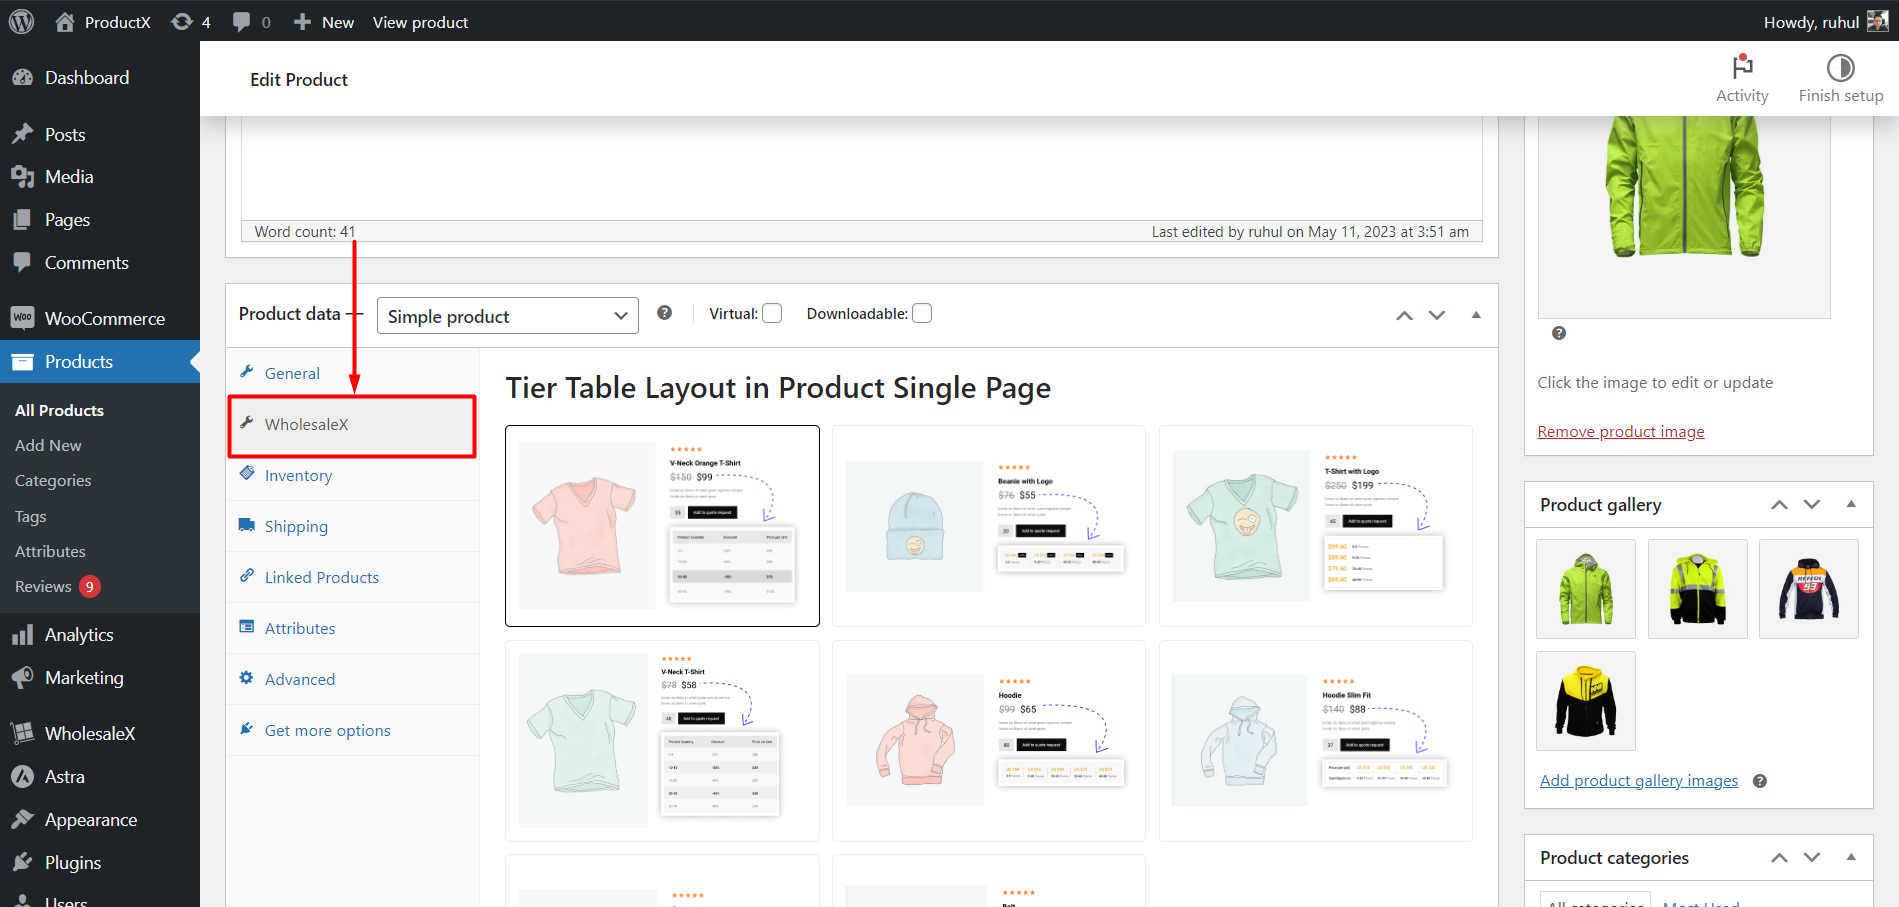 WholesaleX Tab in Single Product Page Editor